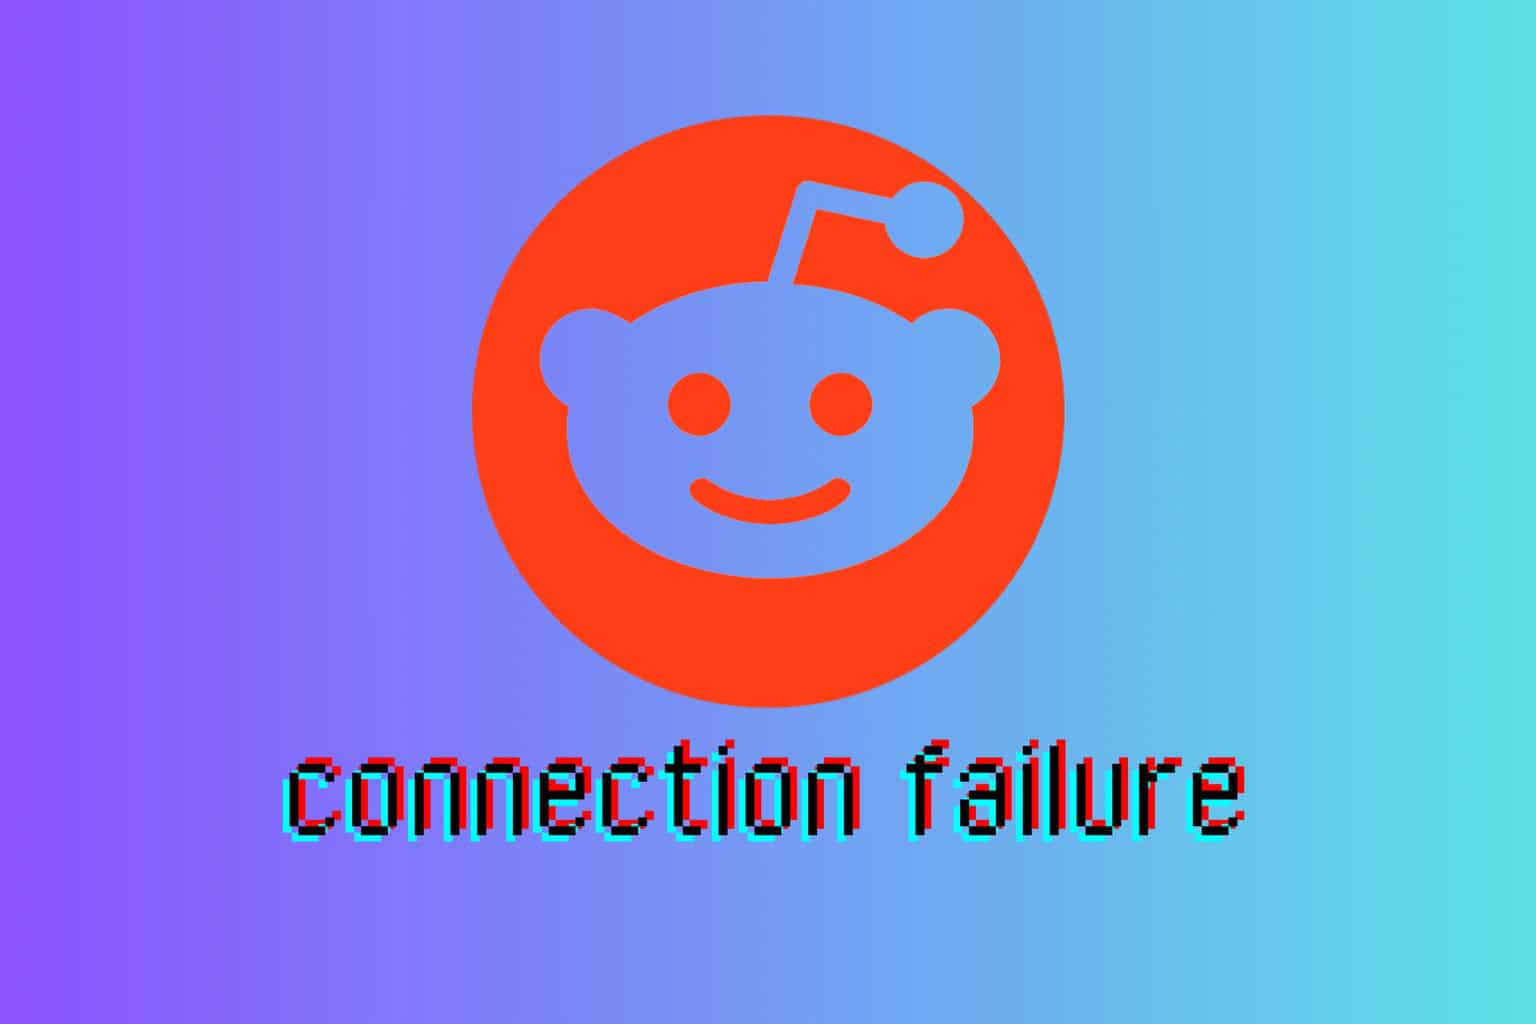 How to fix the Reddit connection failure